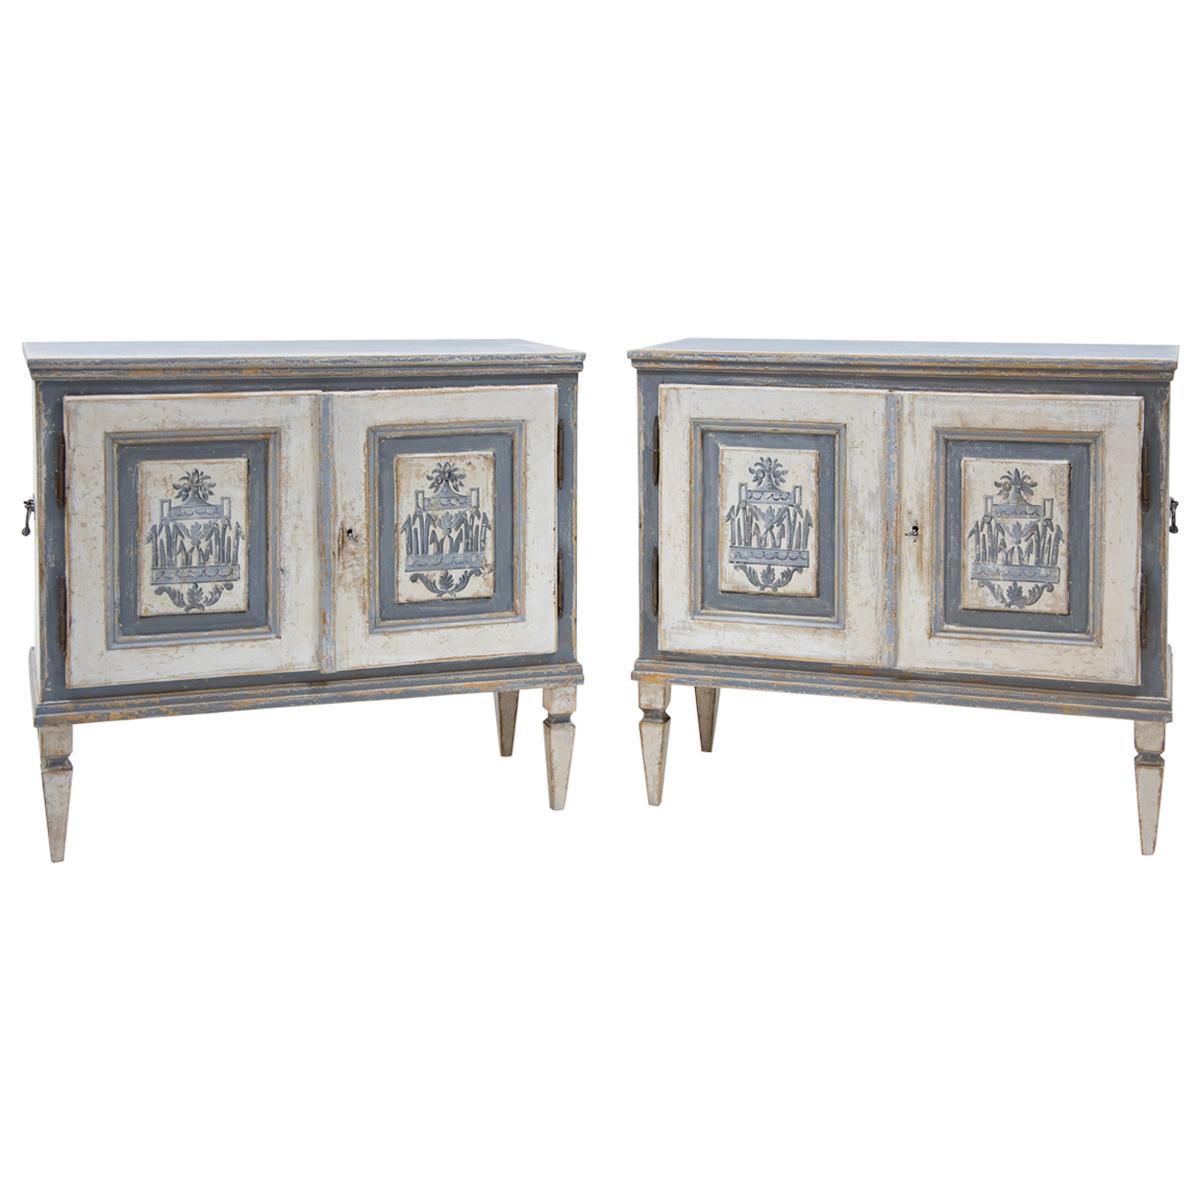 Pair of Painted Louis Seize Sideboards, 19th Century